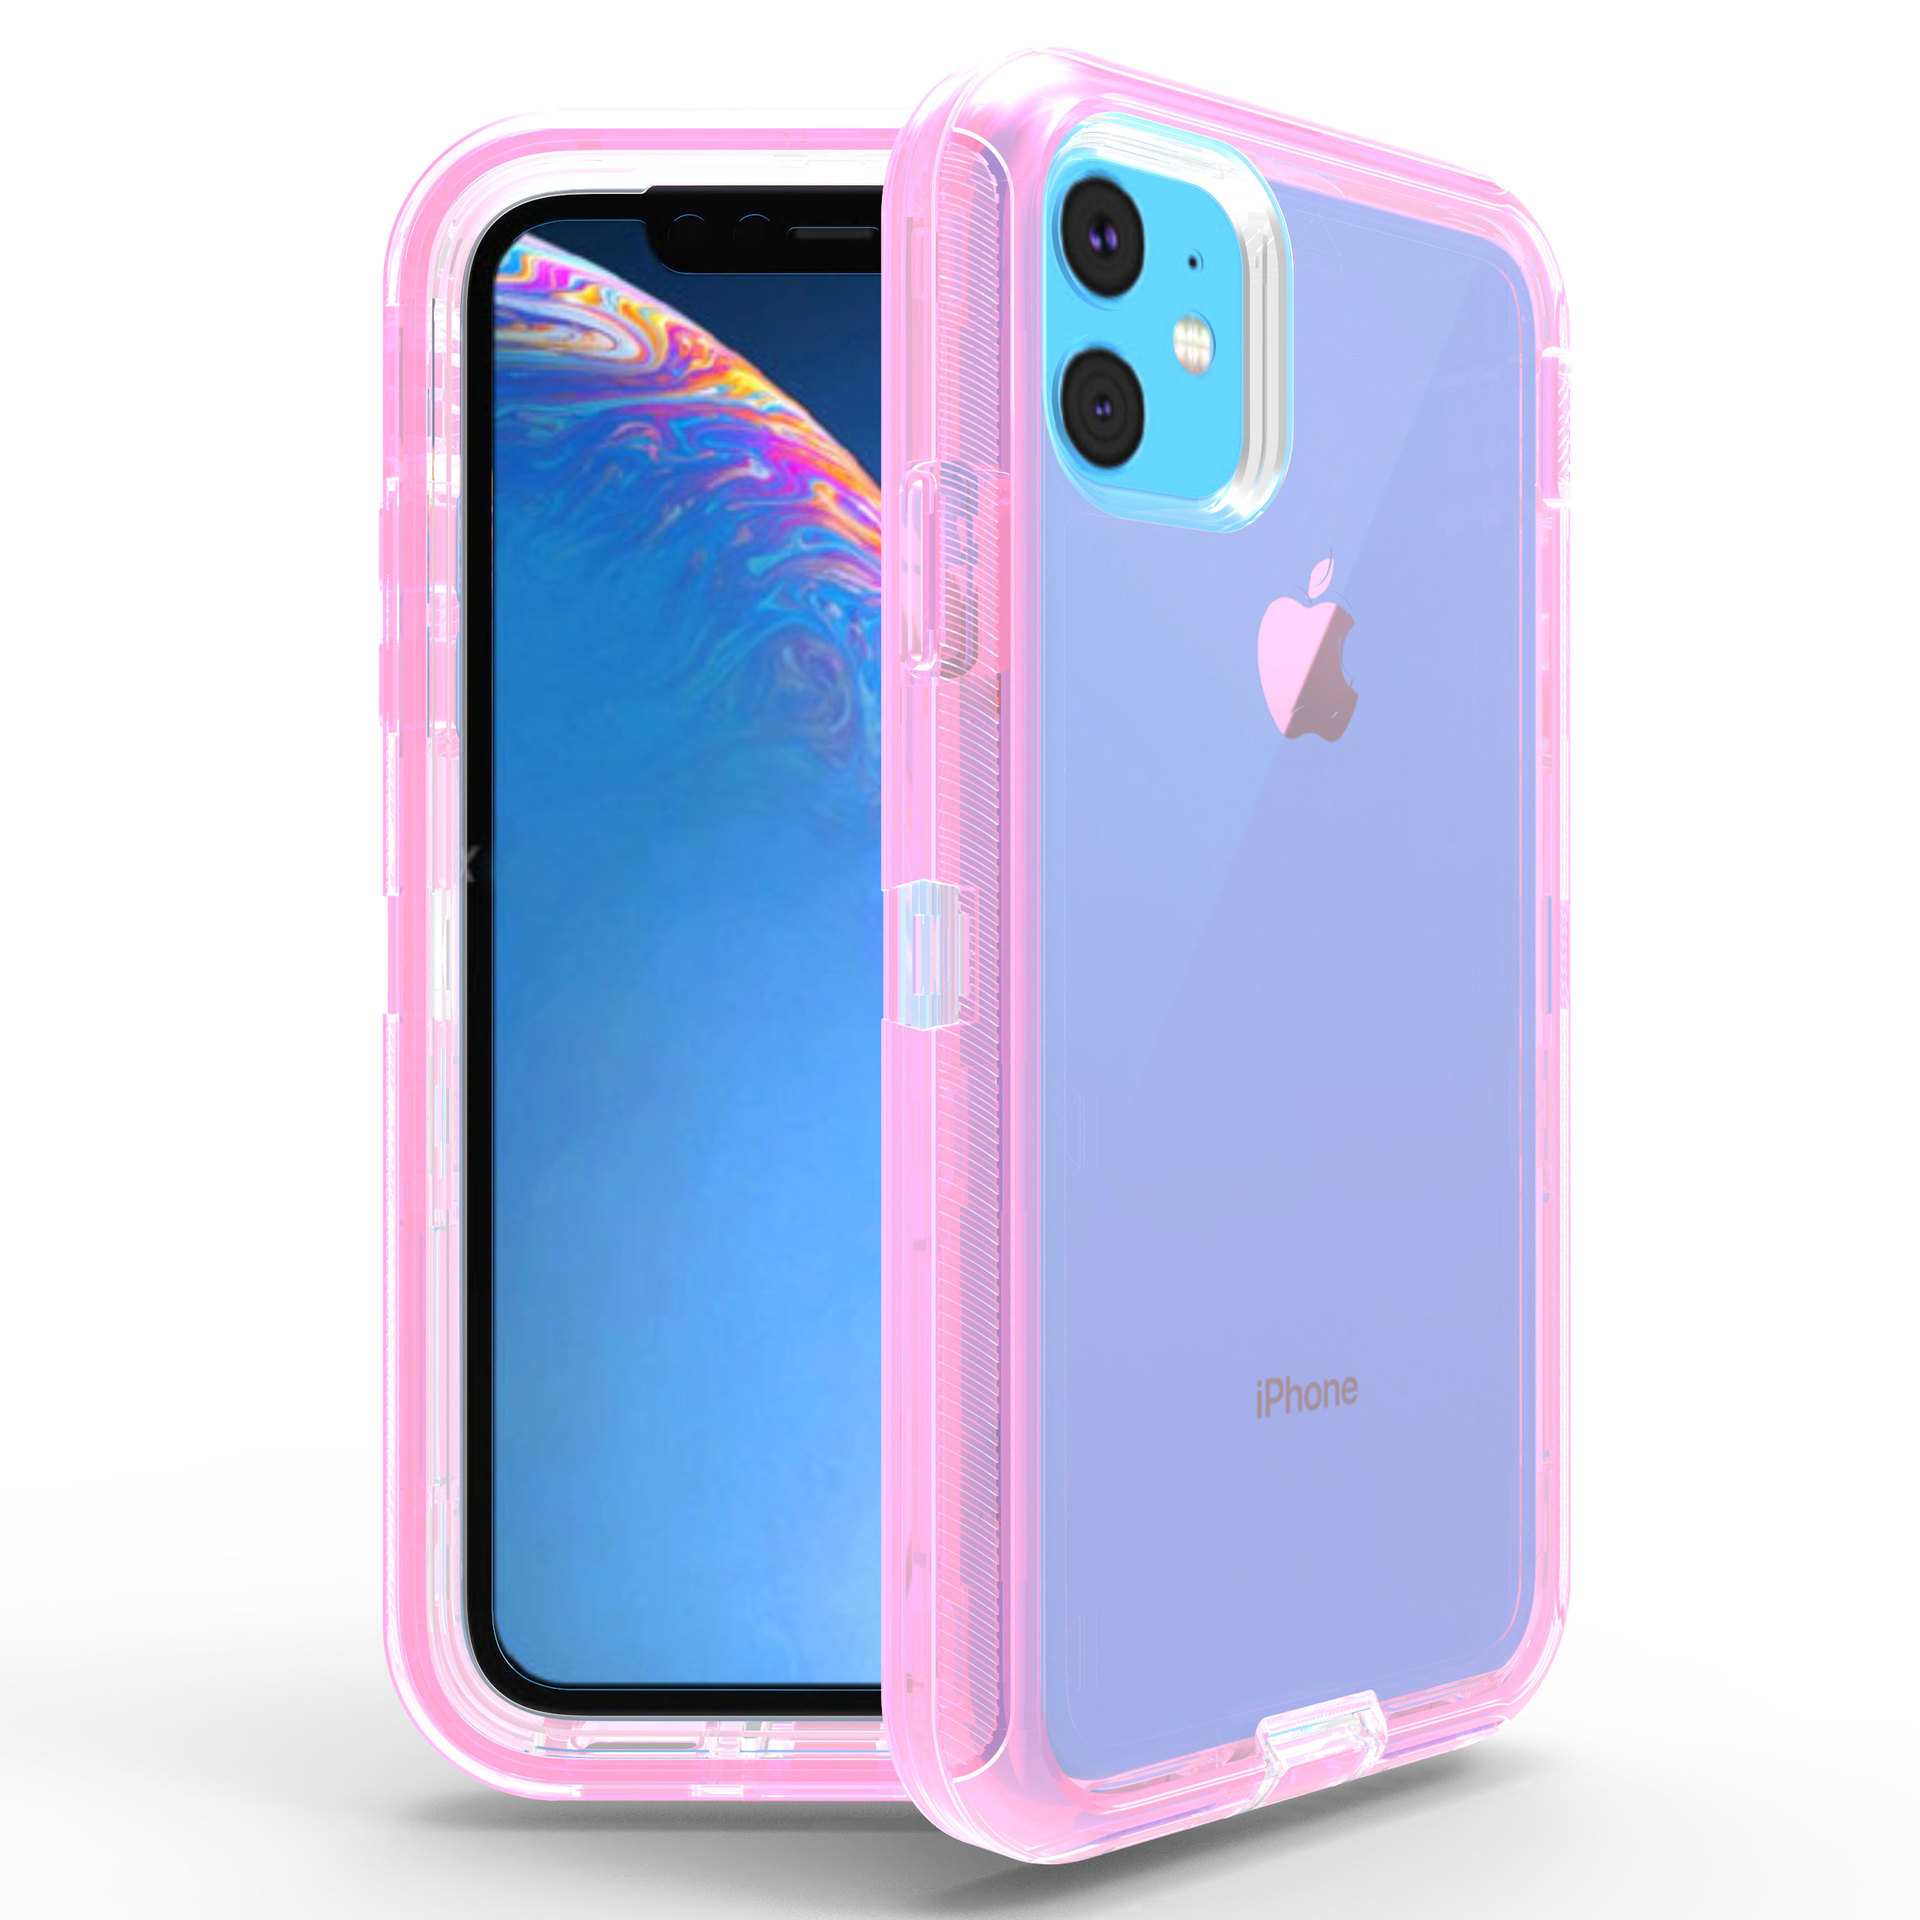 iPHONE 11 Pro (5.8in) Transparent Armor Robot Case (Pink)